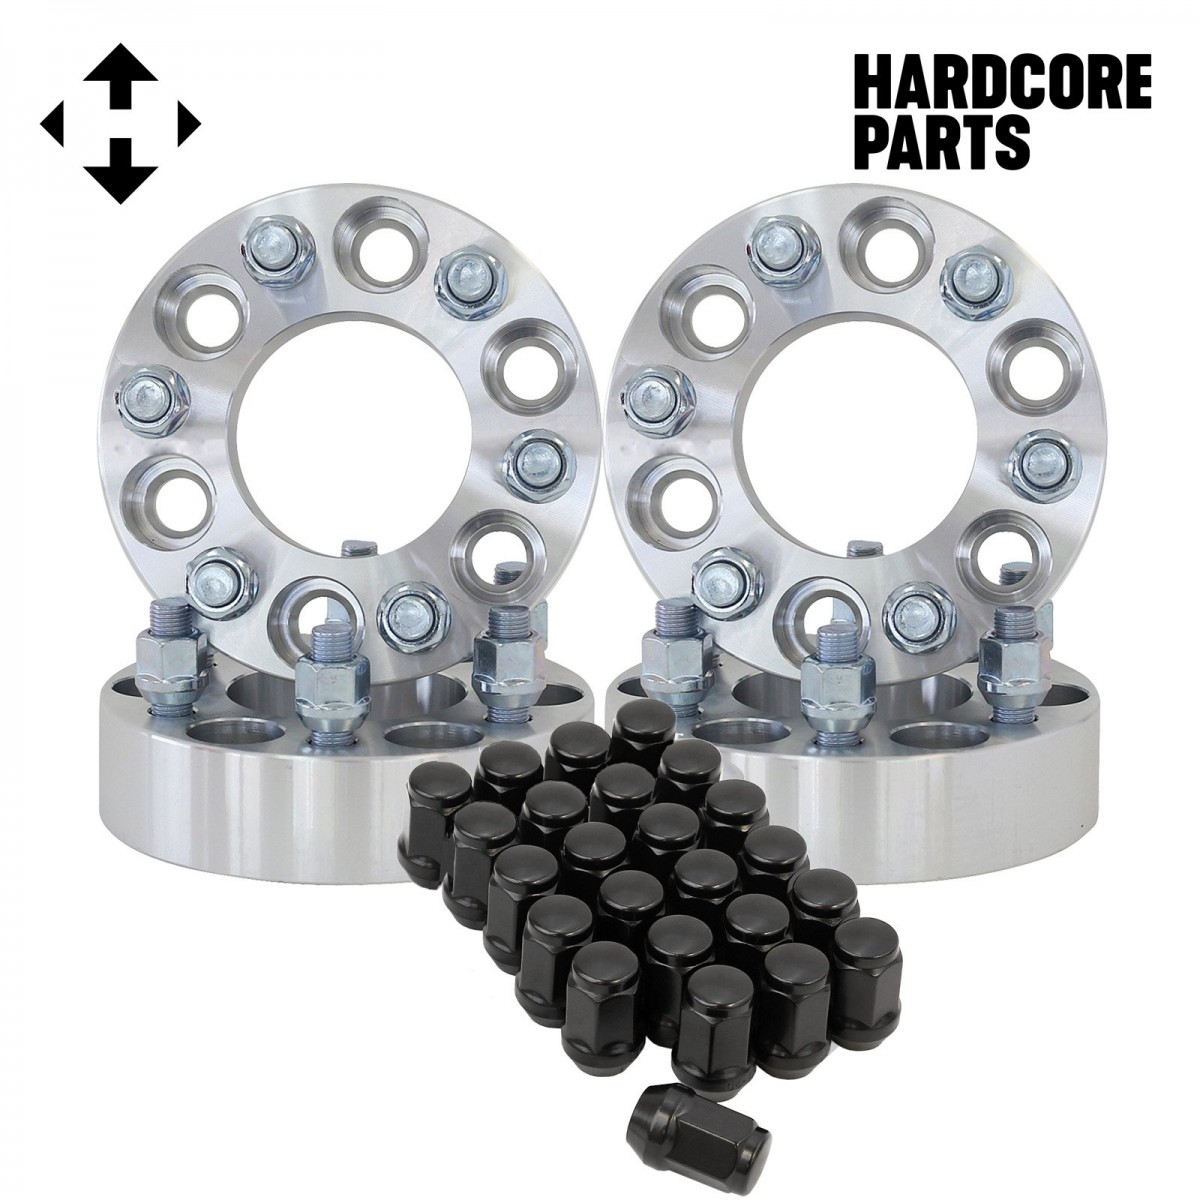 2 Wheel Spacers Adapters, 4×4.5 To 5×4.5, 2 Thick